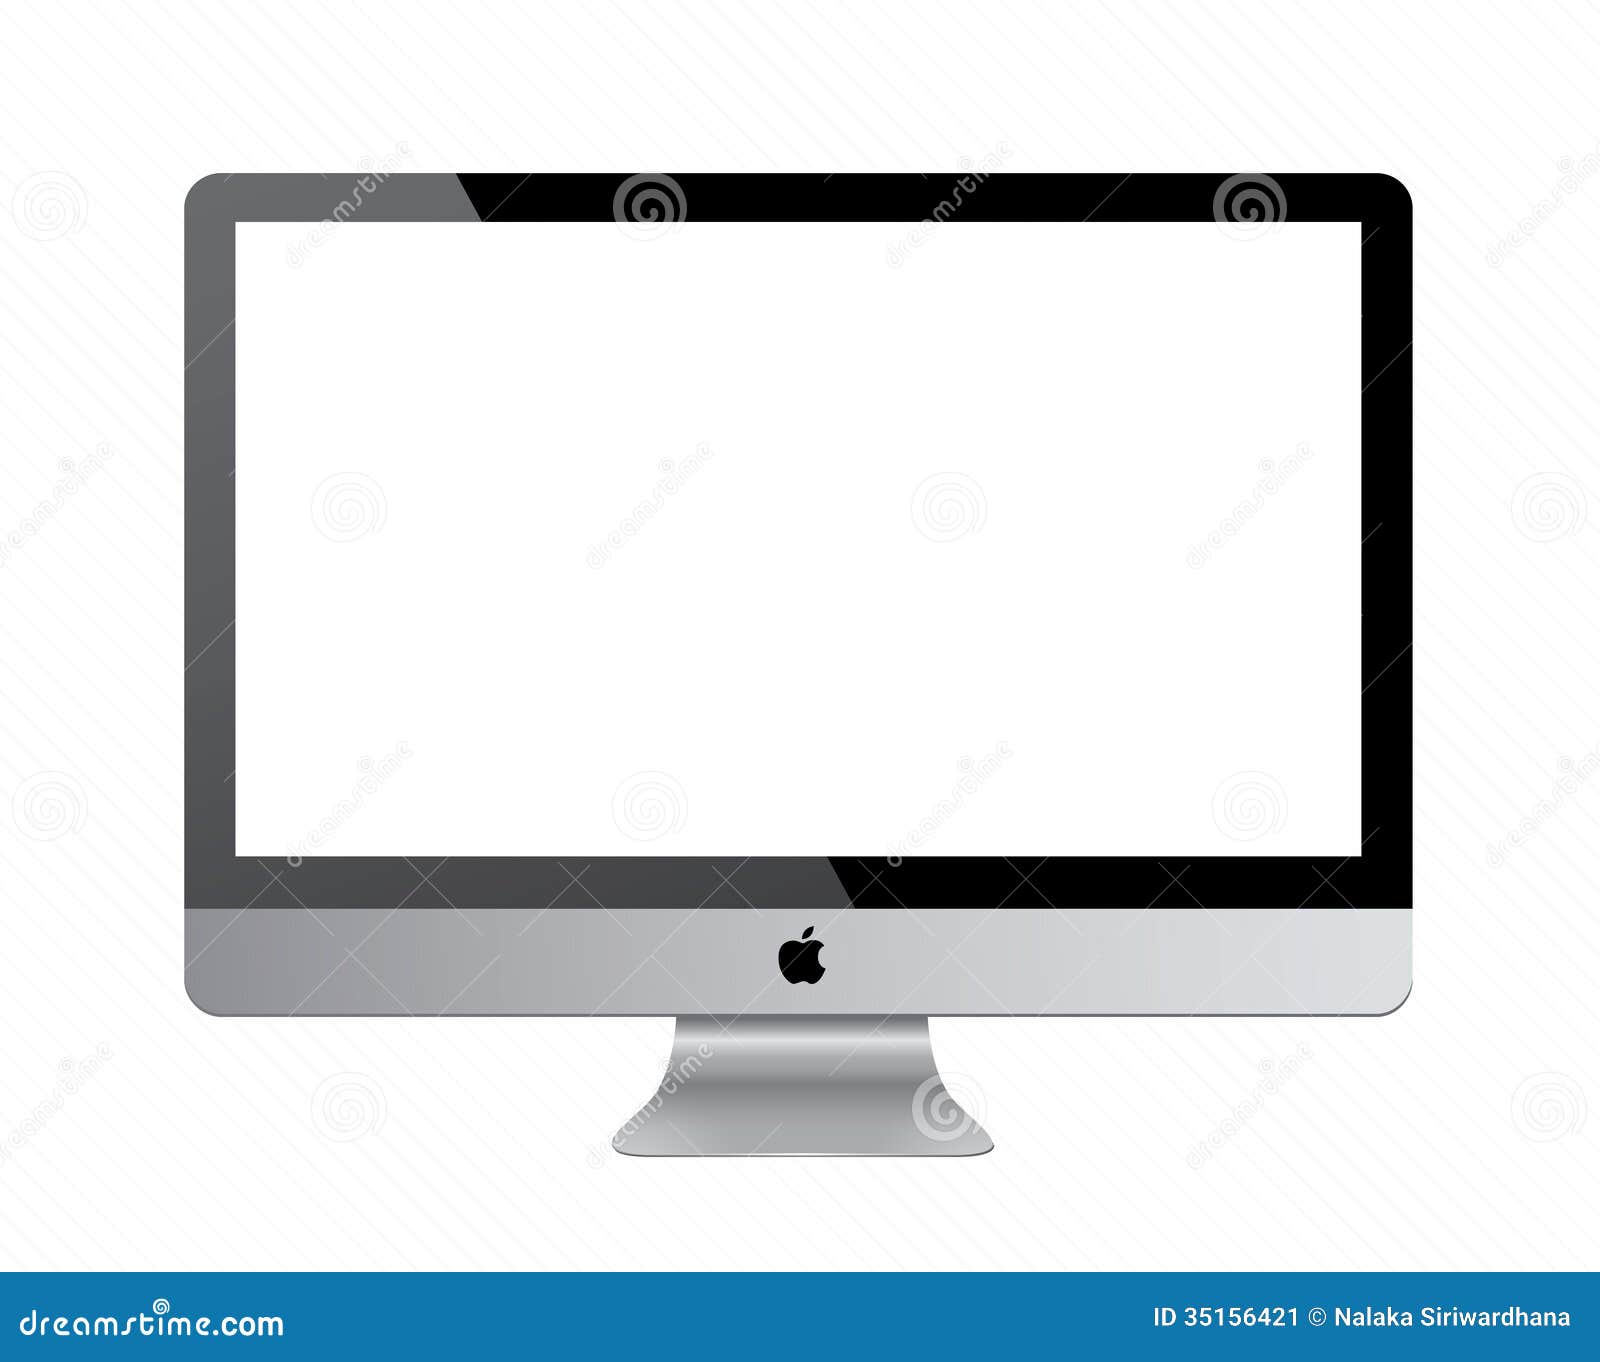 clipart for imac - photo #20